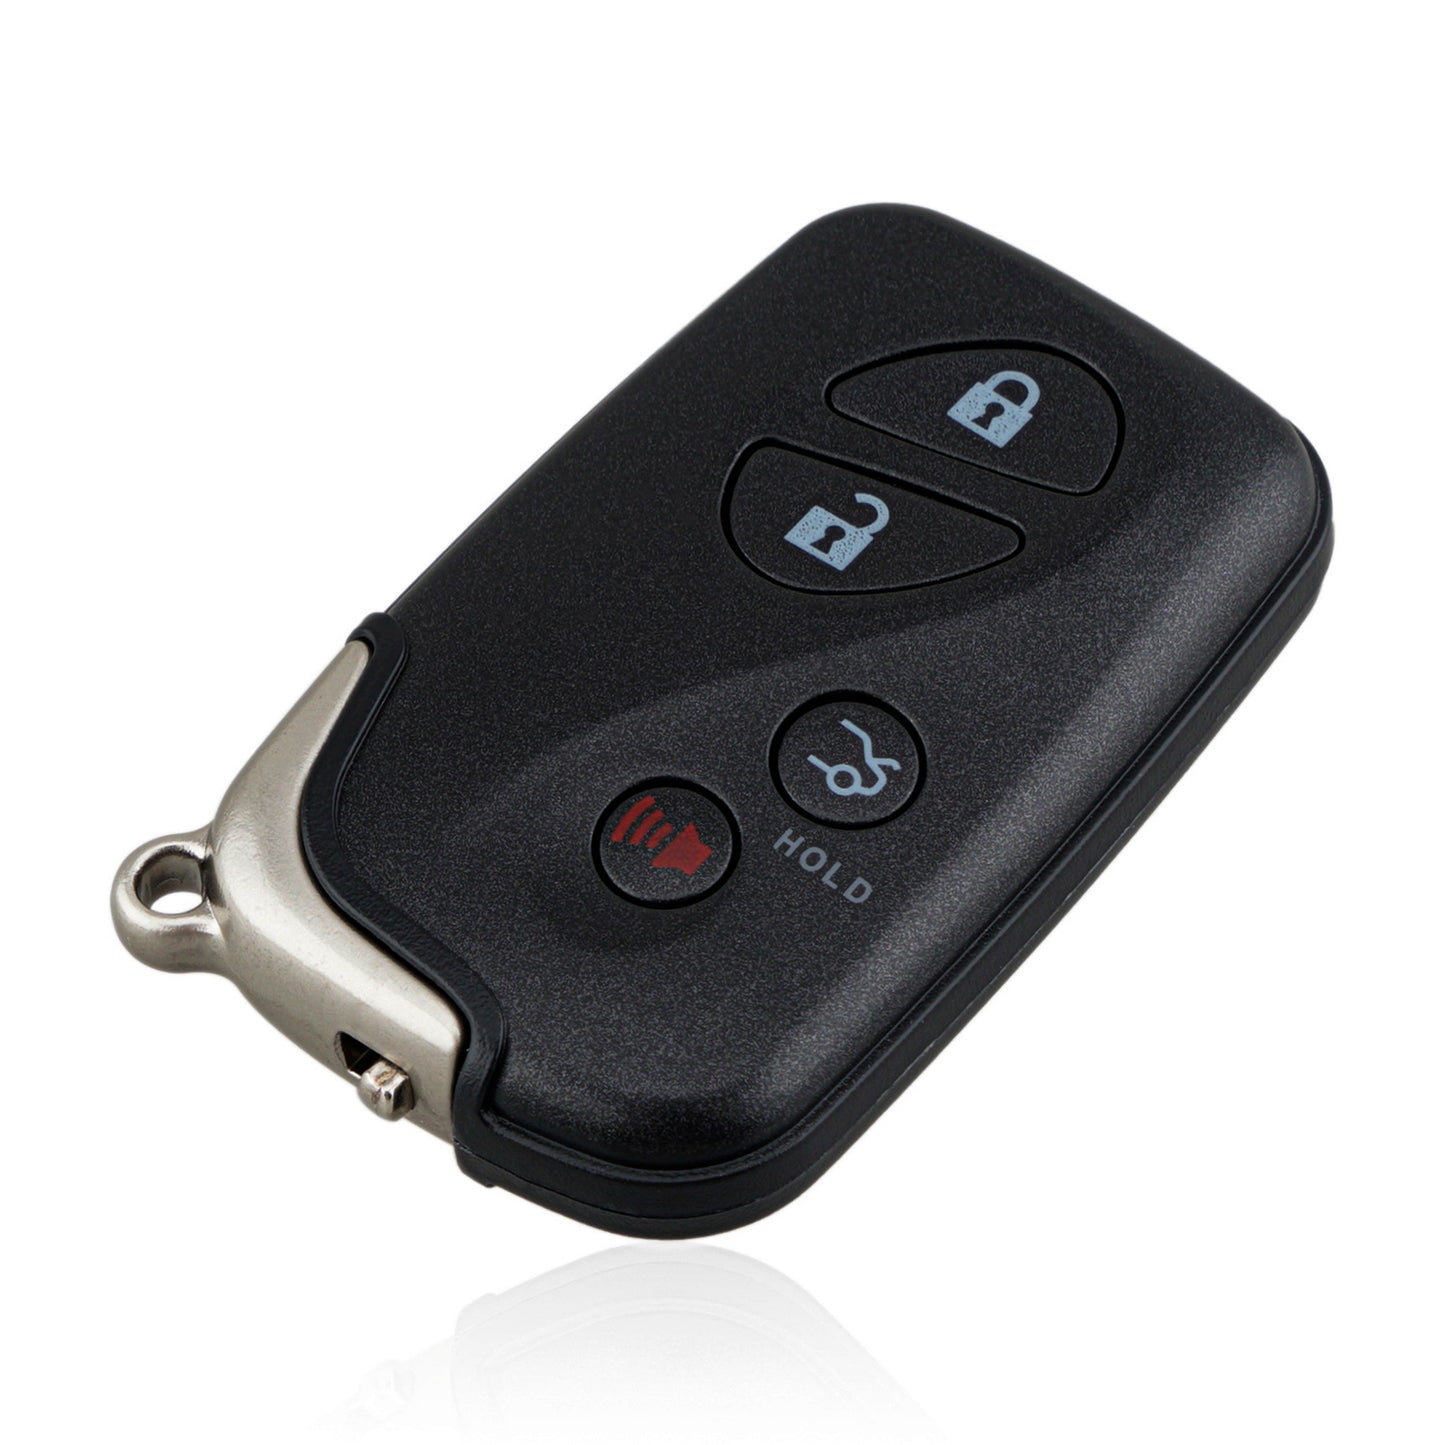 4 Buttons 315MHz Smart Prox Key Entry Car Fob Keyless Remote Key For 2005-2008 Lexus IS250 IS350 LS460 LS600h GS300 GS350 GS430 GS450h GS460 ES350 FCC: HYQ14AAB 0140 SKU : H526